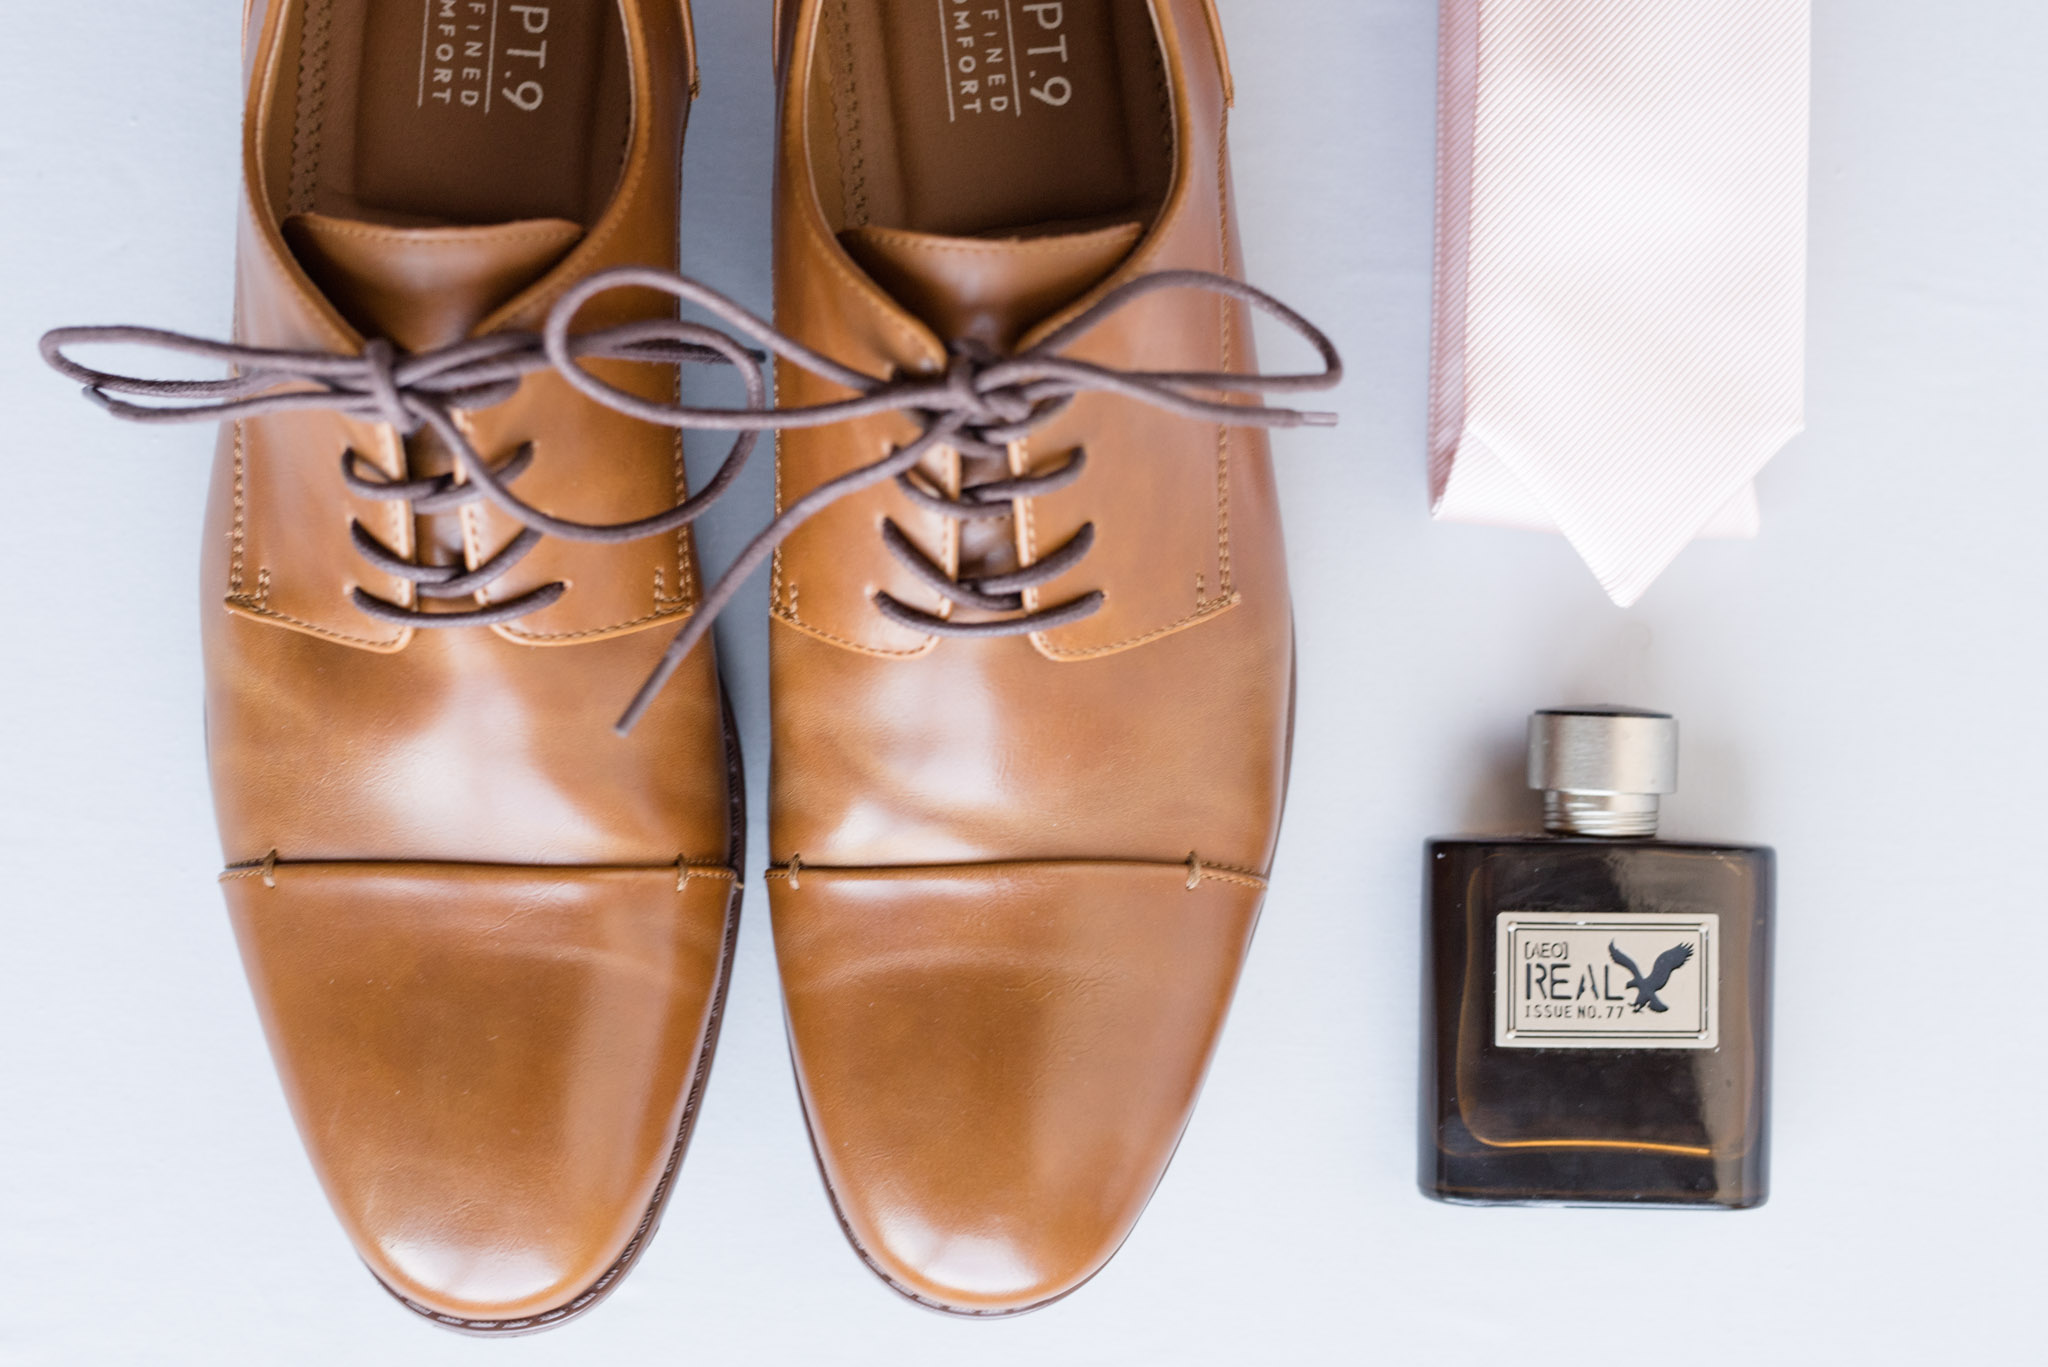 Groom's shoes, tie, and cologne.